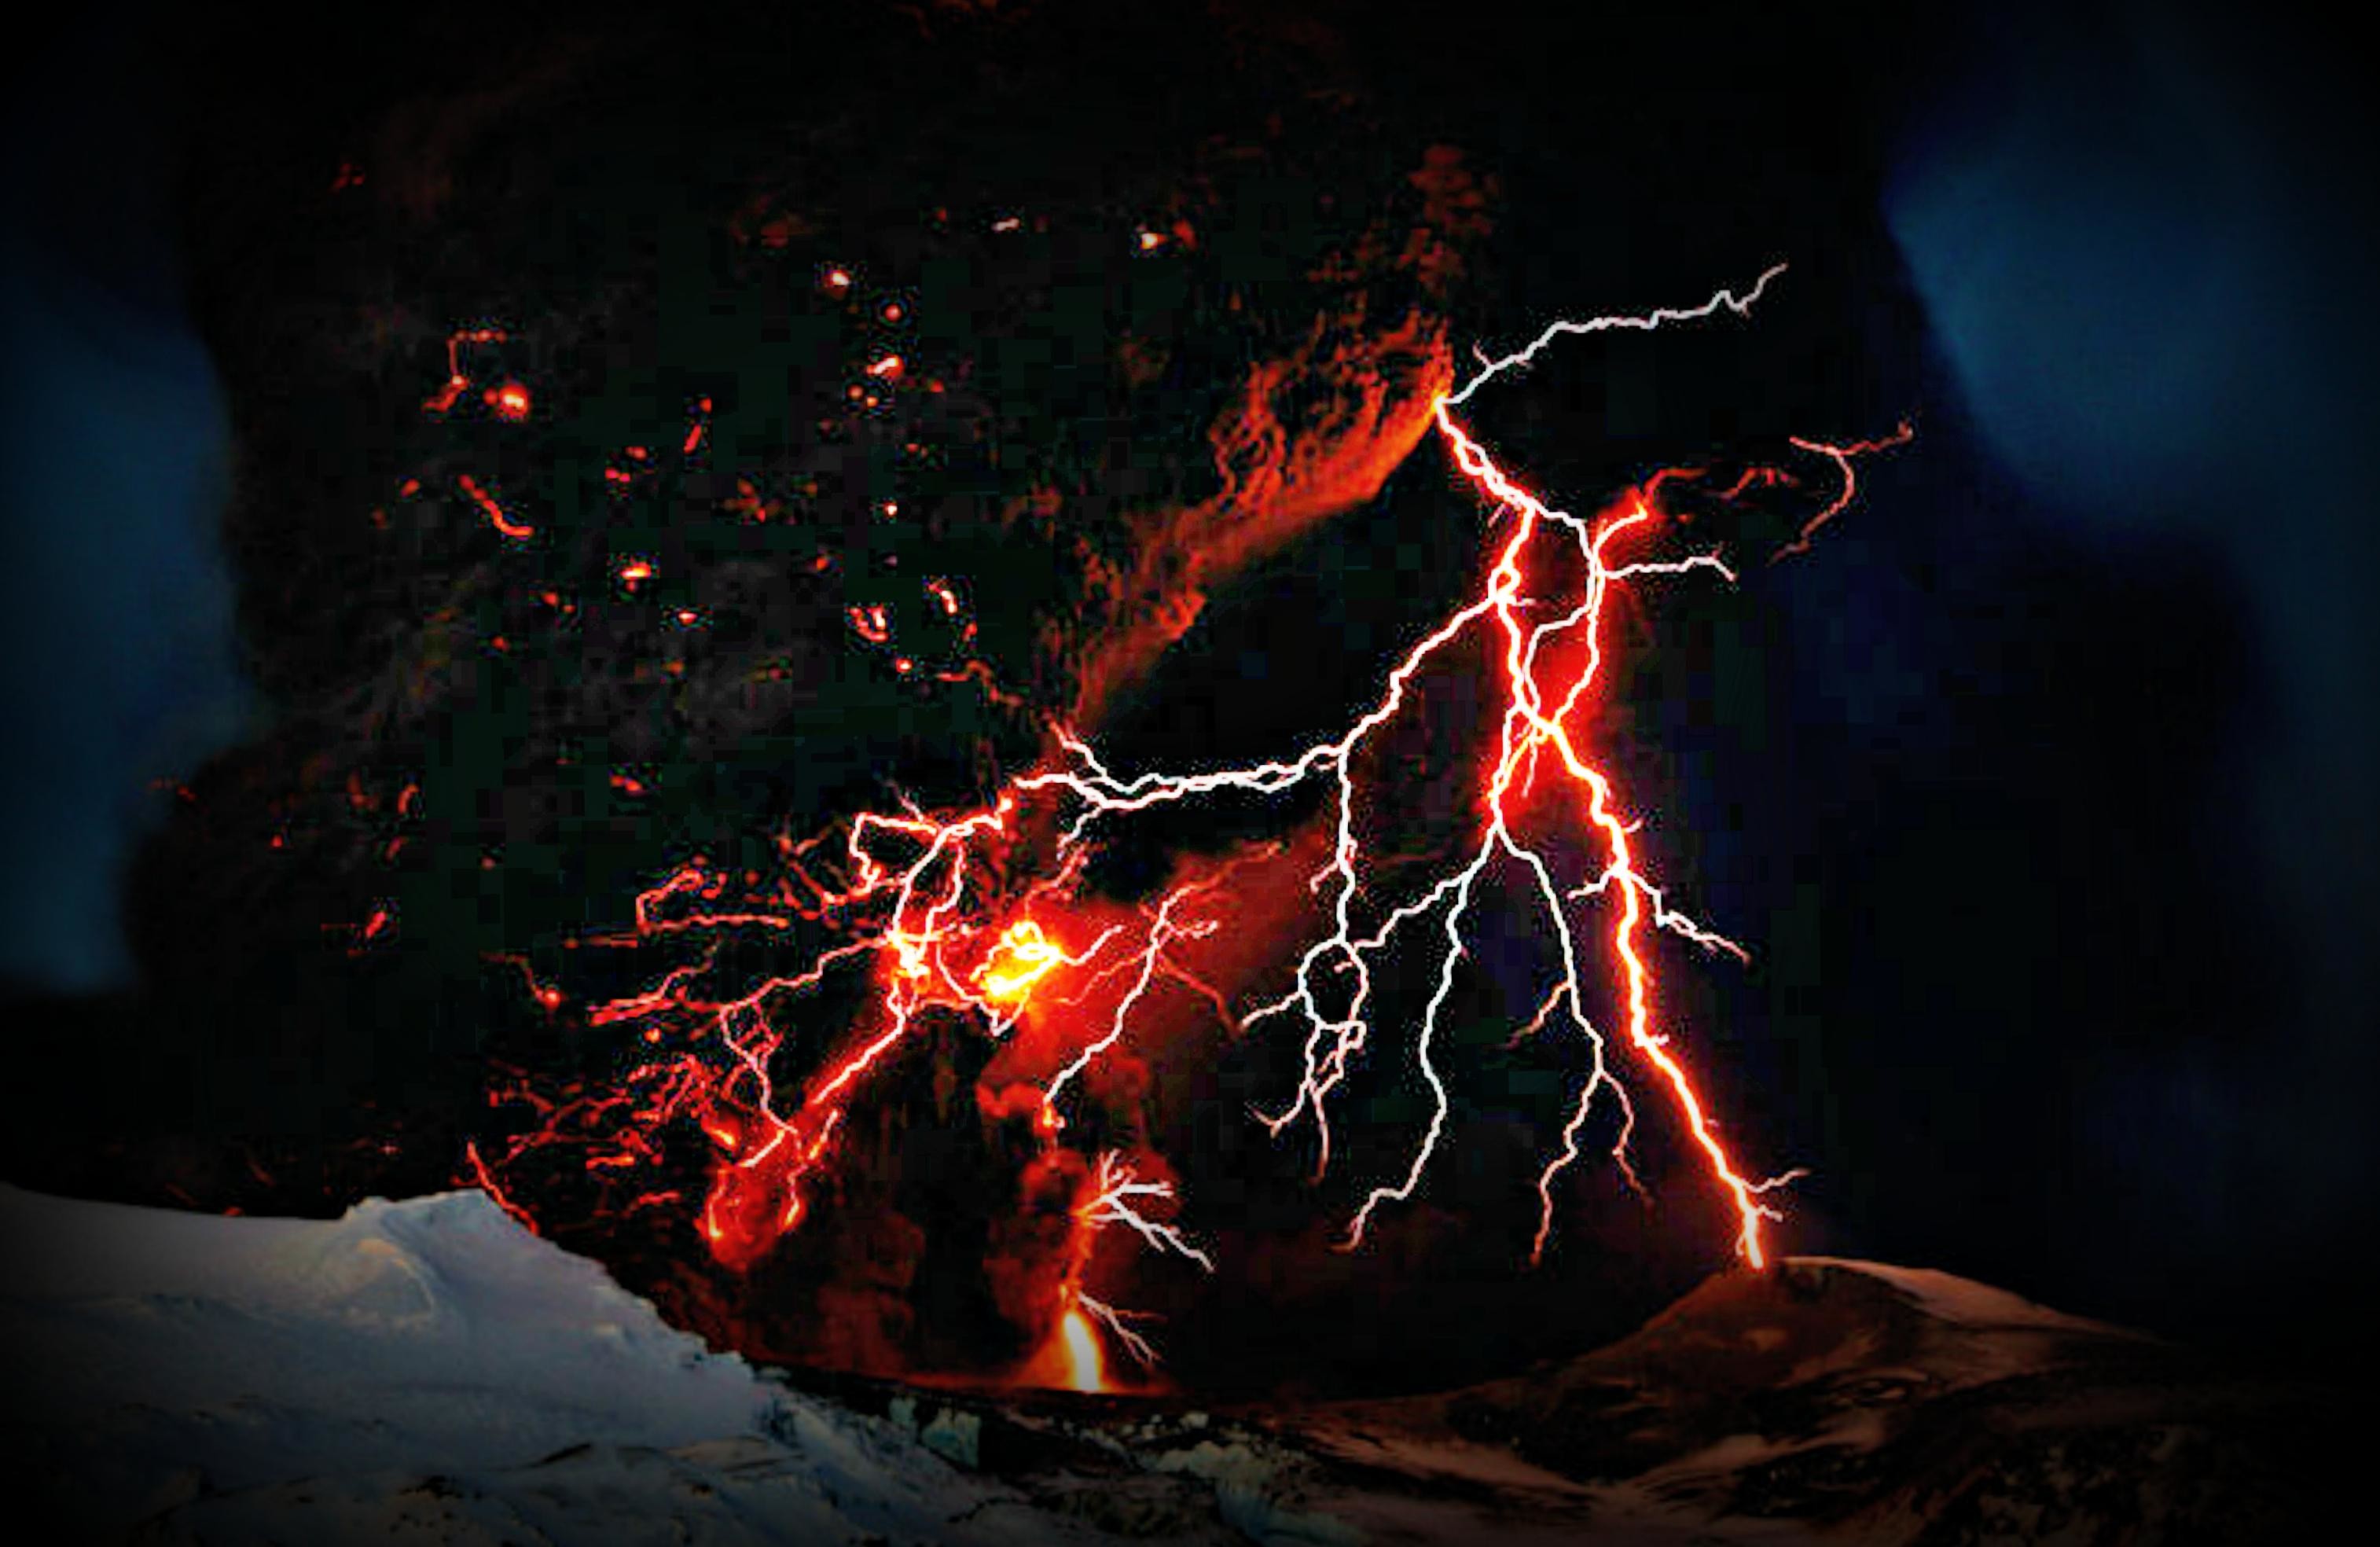 3028x1968 Volcano lightning - (#101403) - High Quality and Resolution Wallpapers .